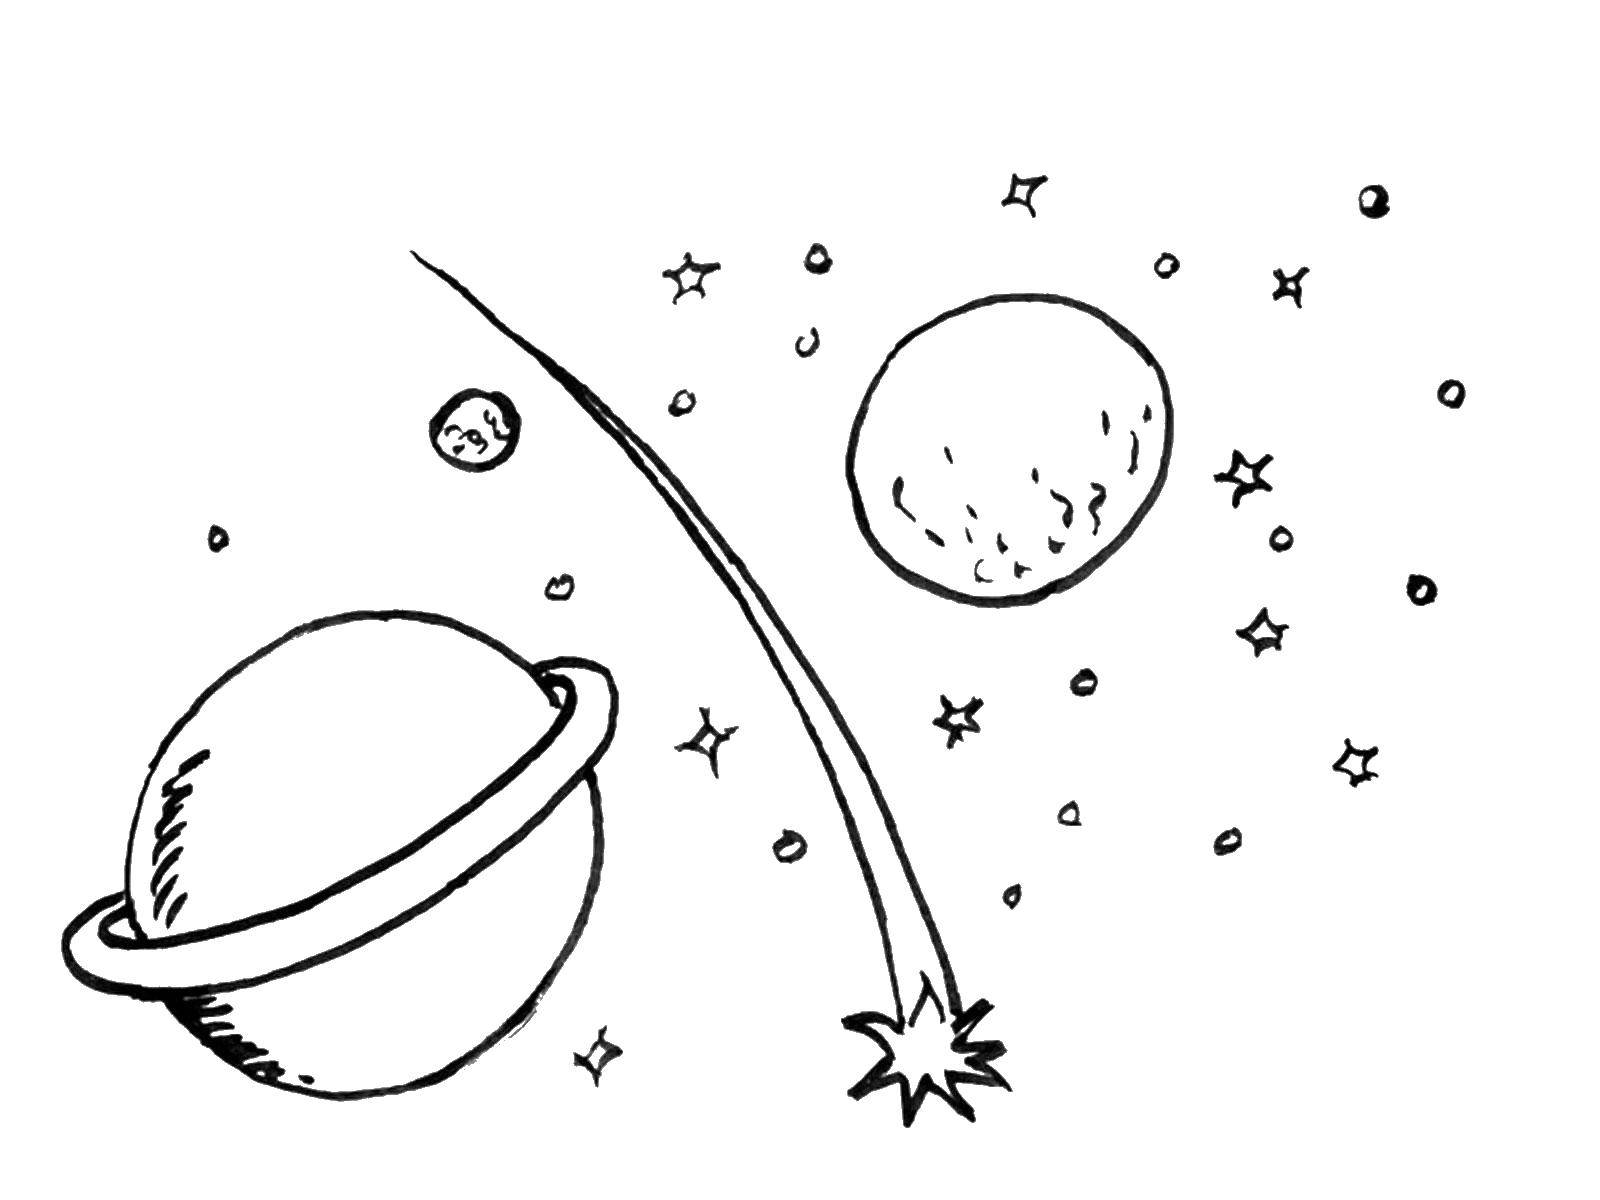 Coloring A comet among the planets. Category space. Tags:  space, planet, star, comet.